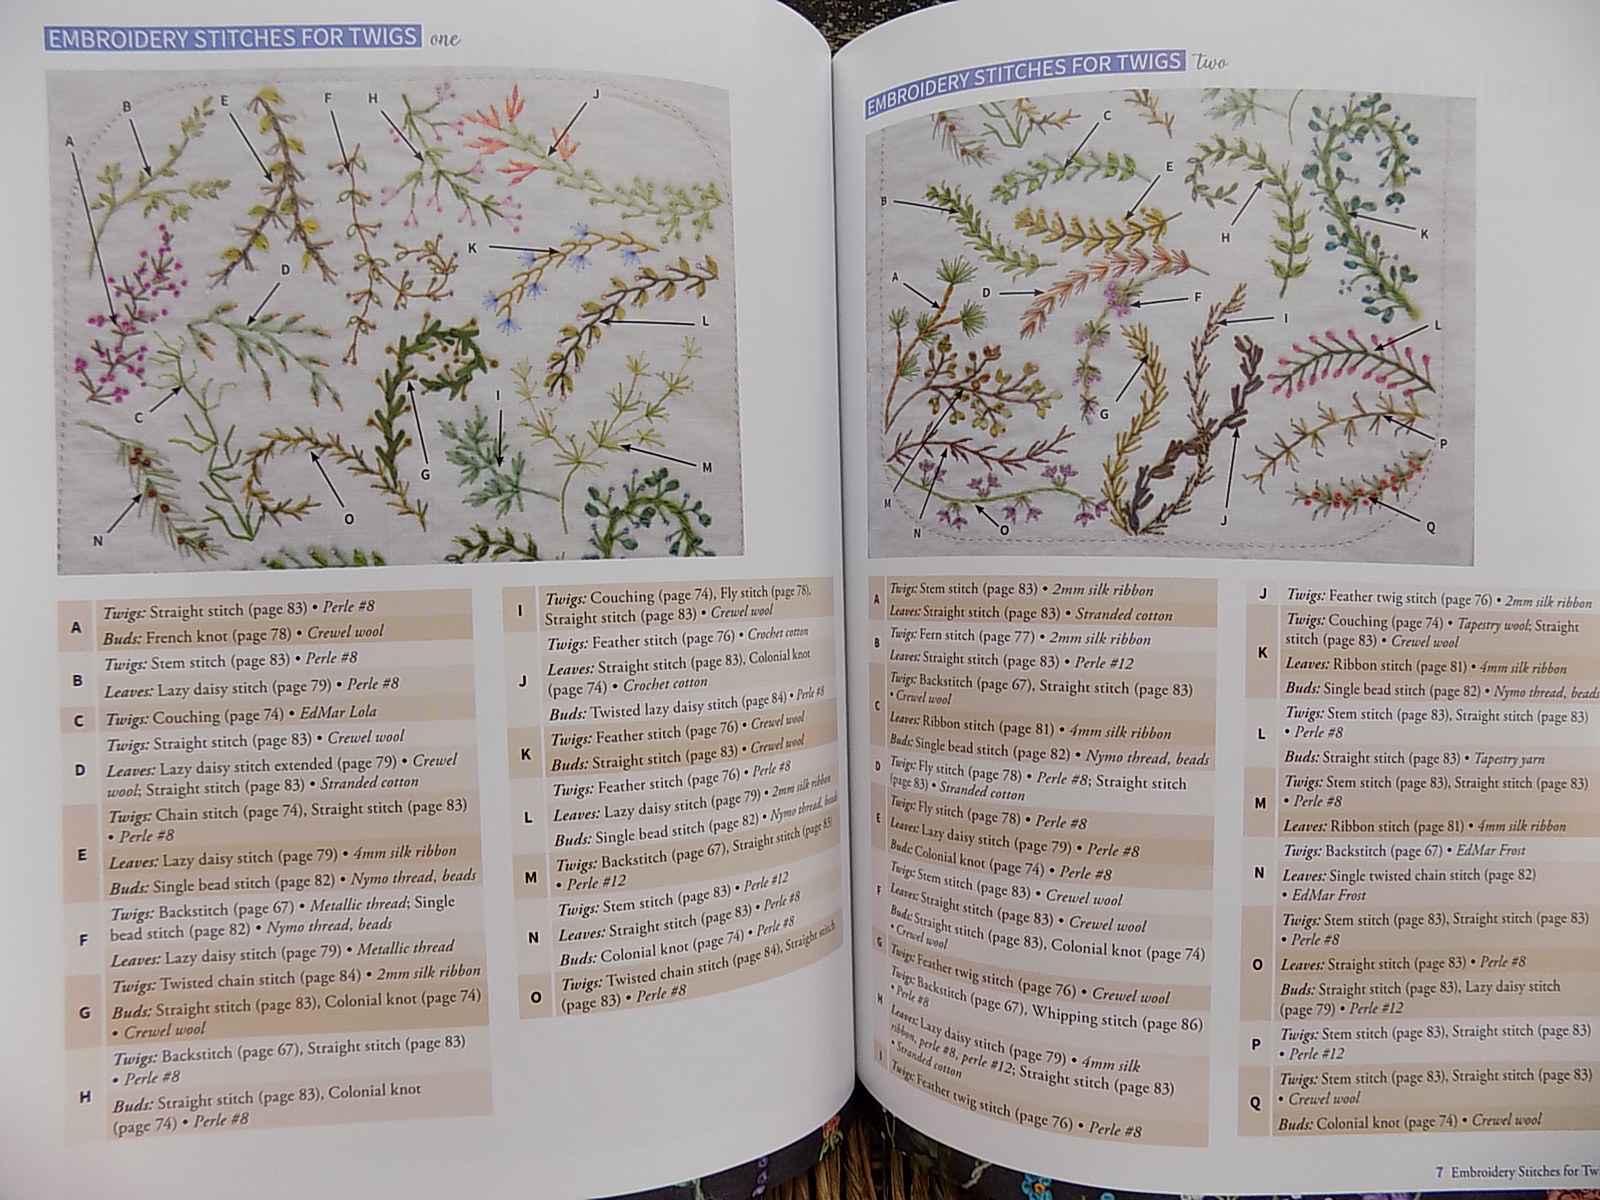 Foolproof Flower Embroidery by Jennifer Clouston – Seed Stitch Studio